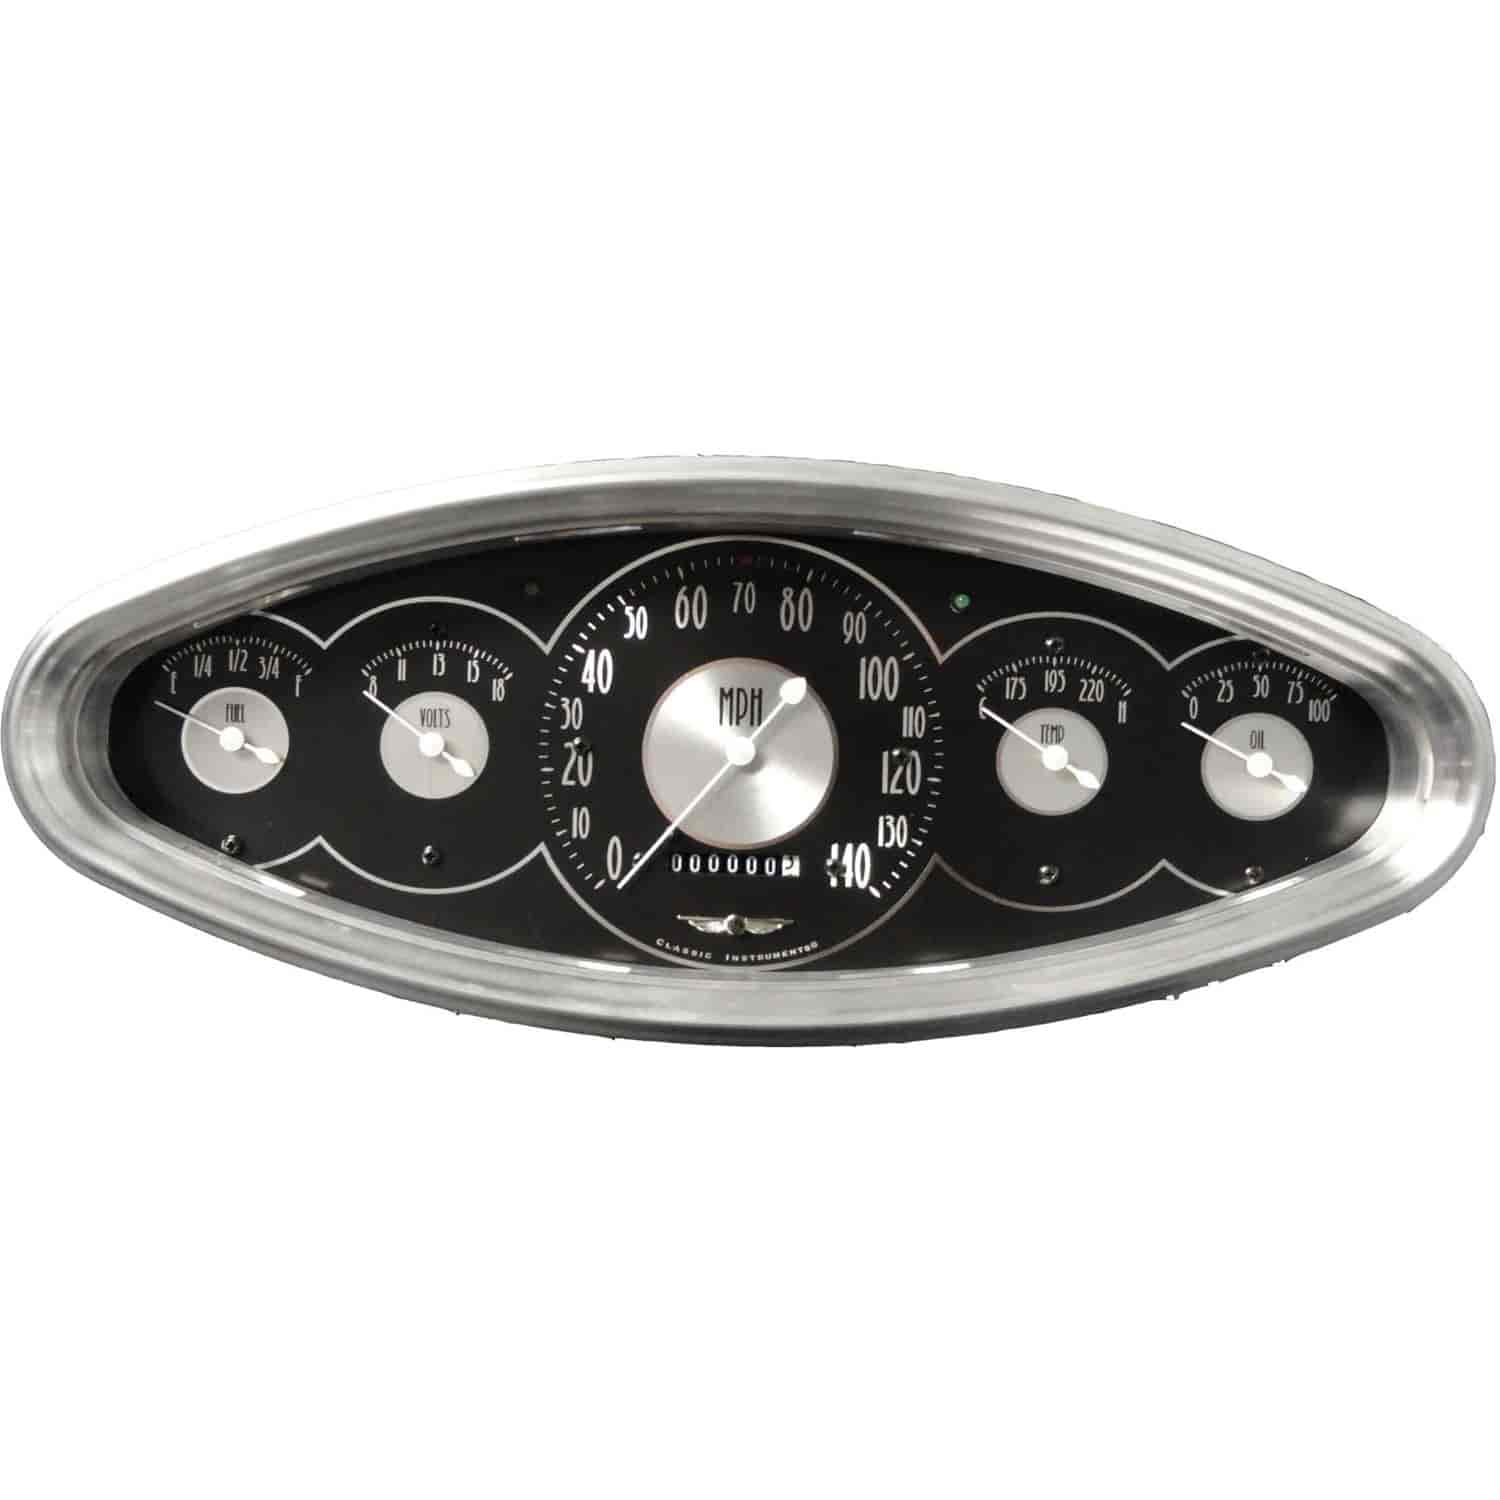 All American Tradition Package 5-Gauge Instrument Panel Includes: Speedometer (140 MPH)